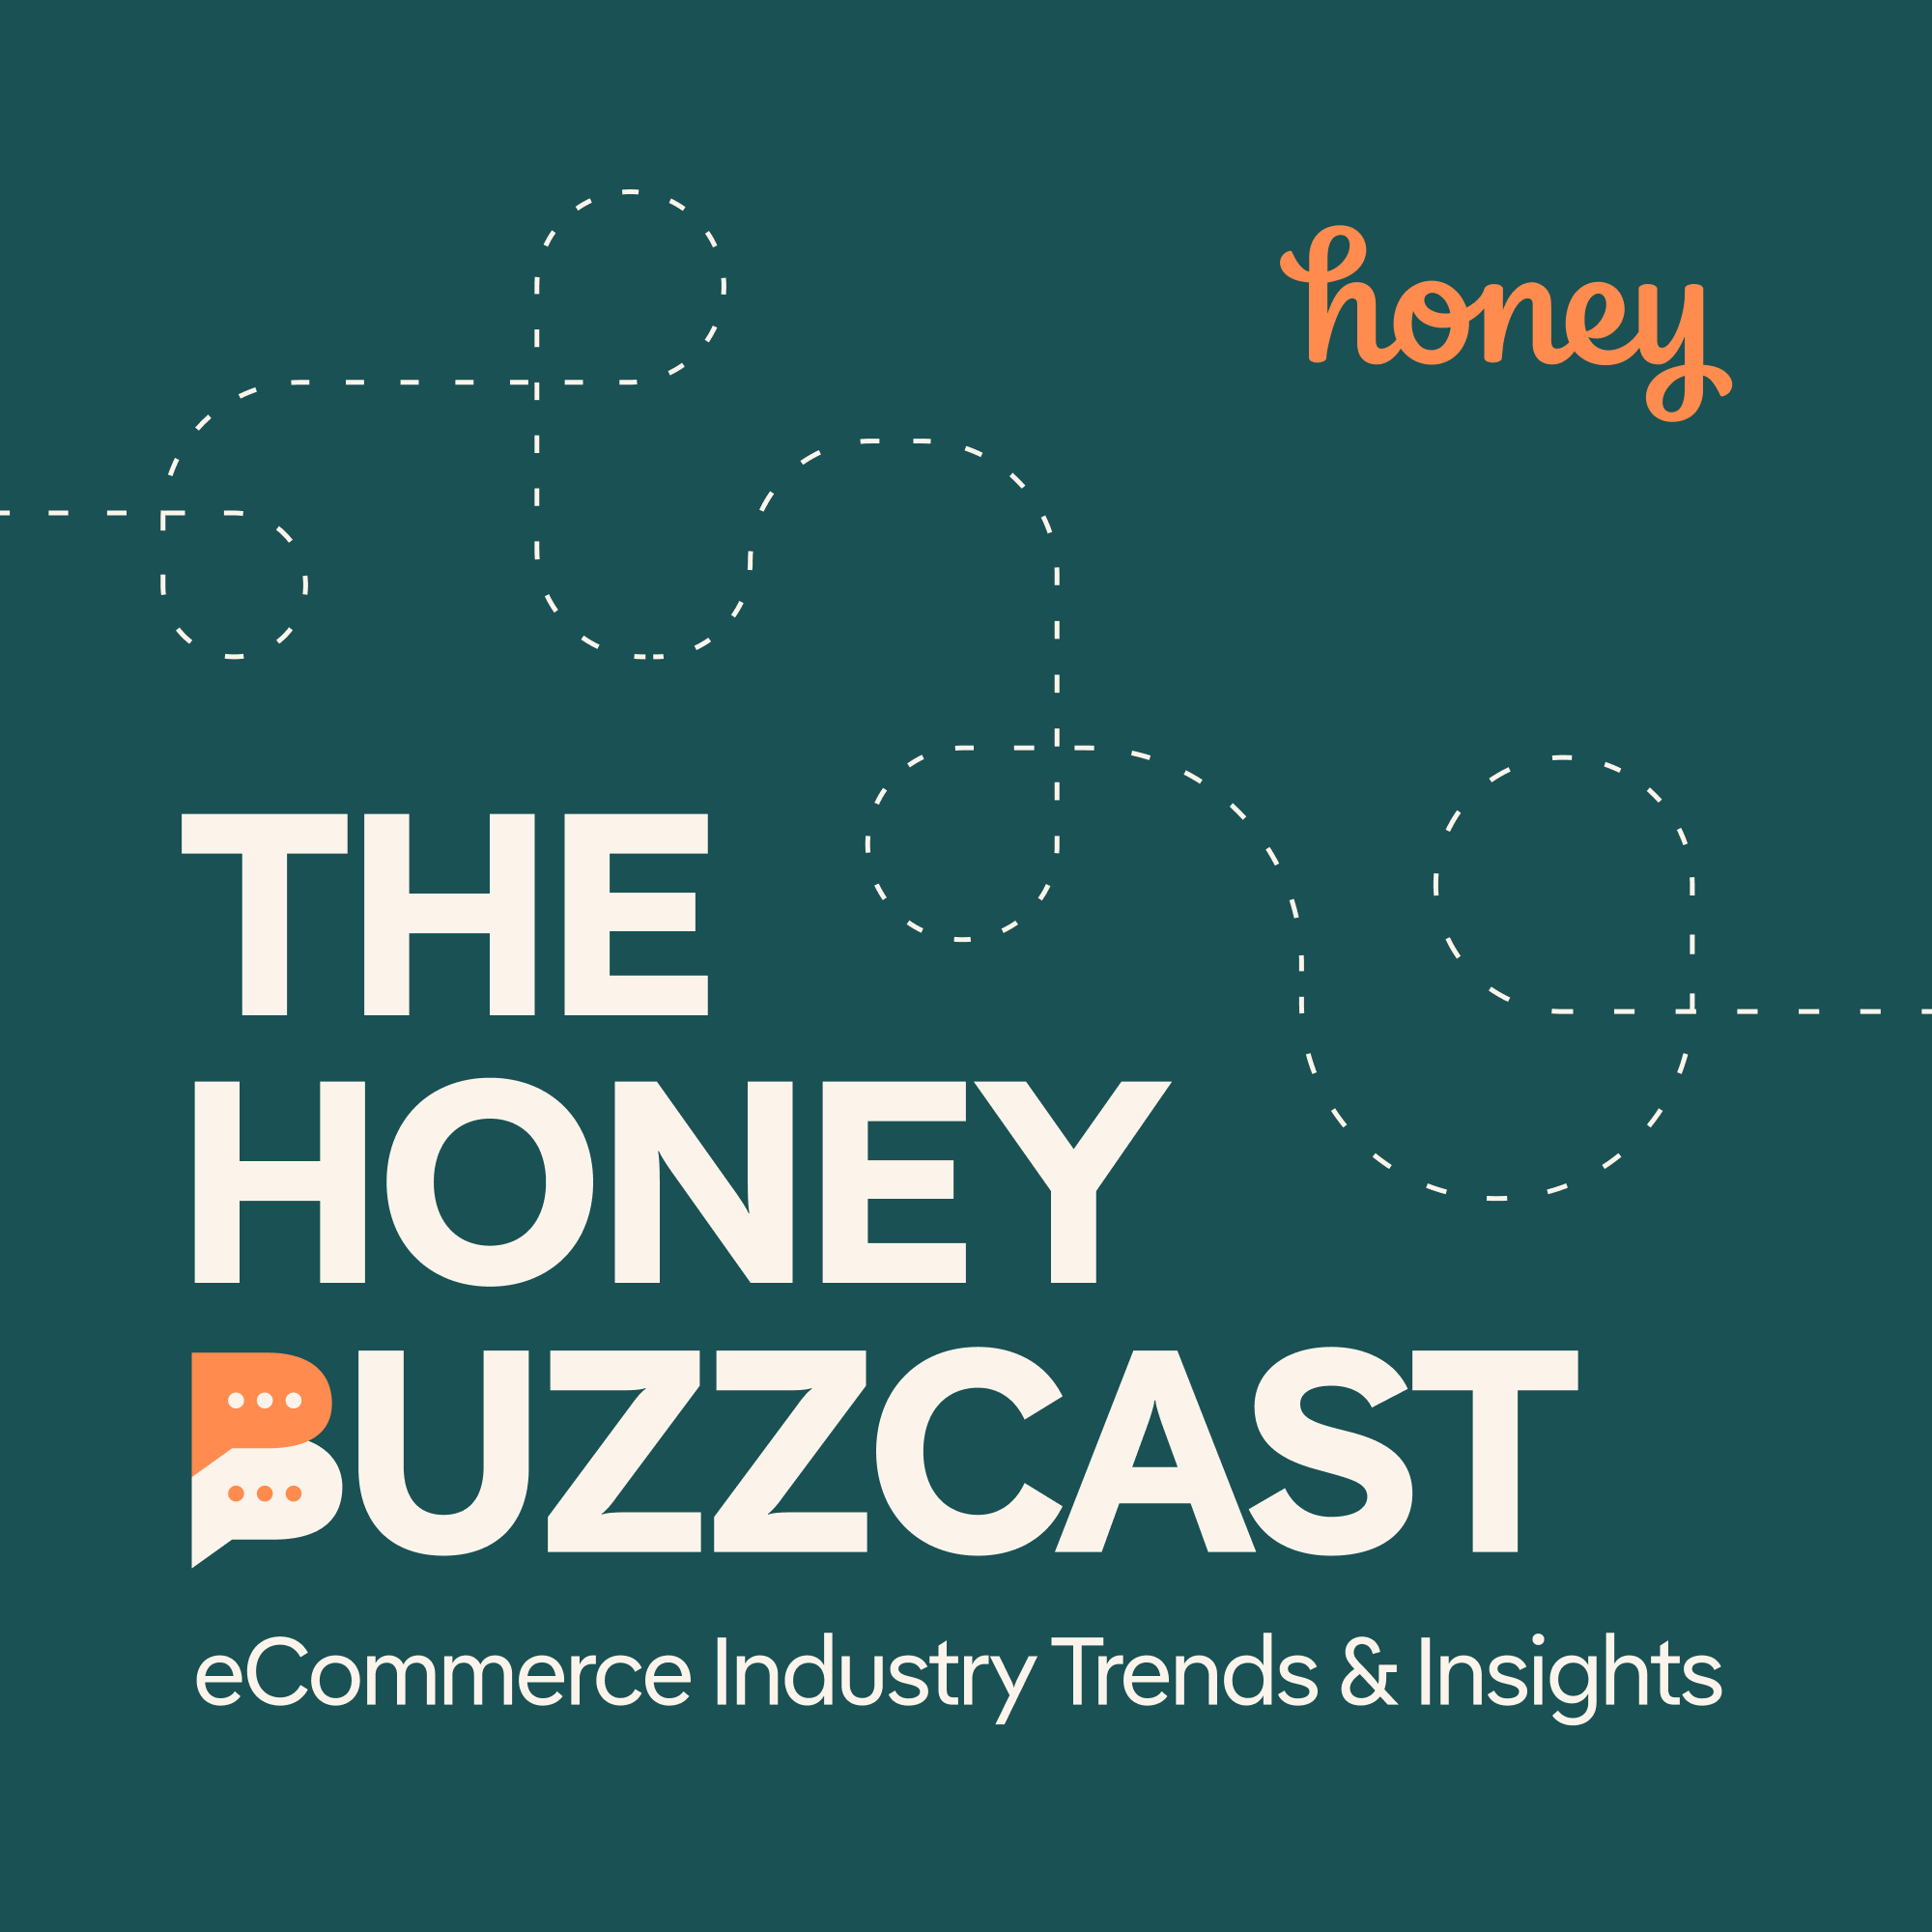 eCommerce Industry Trends & Insights